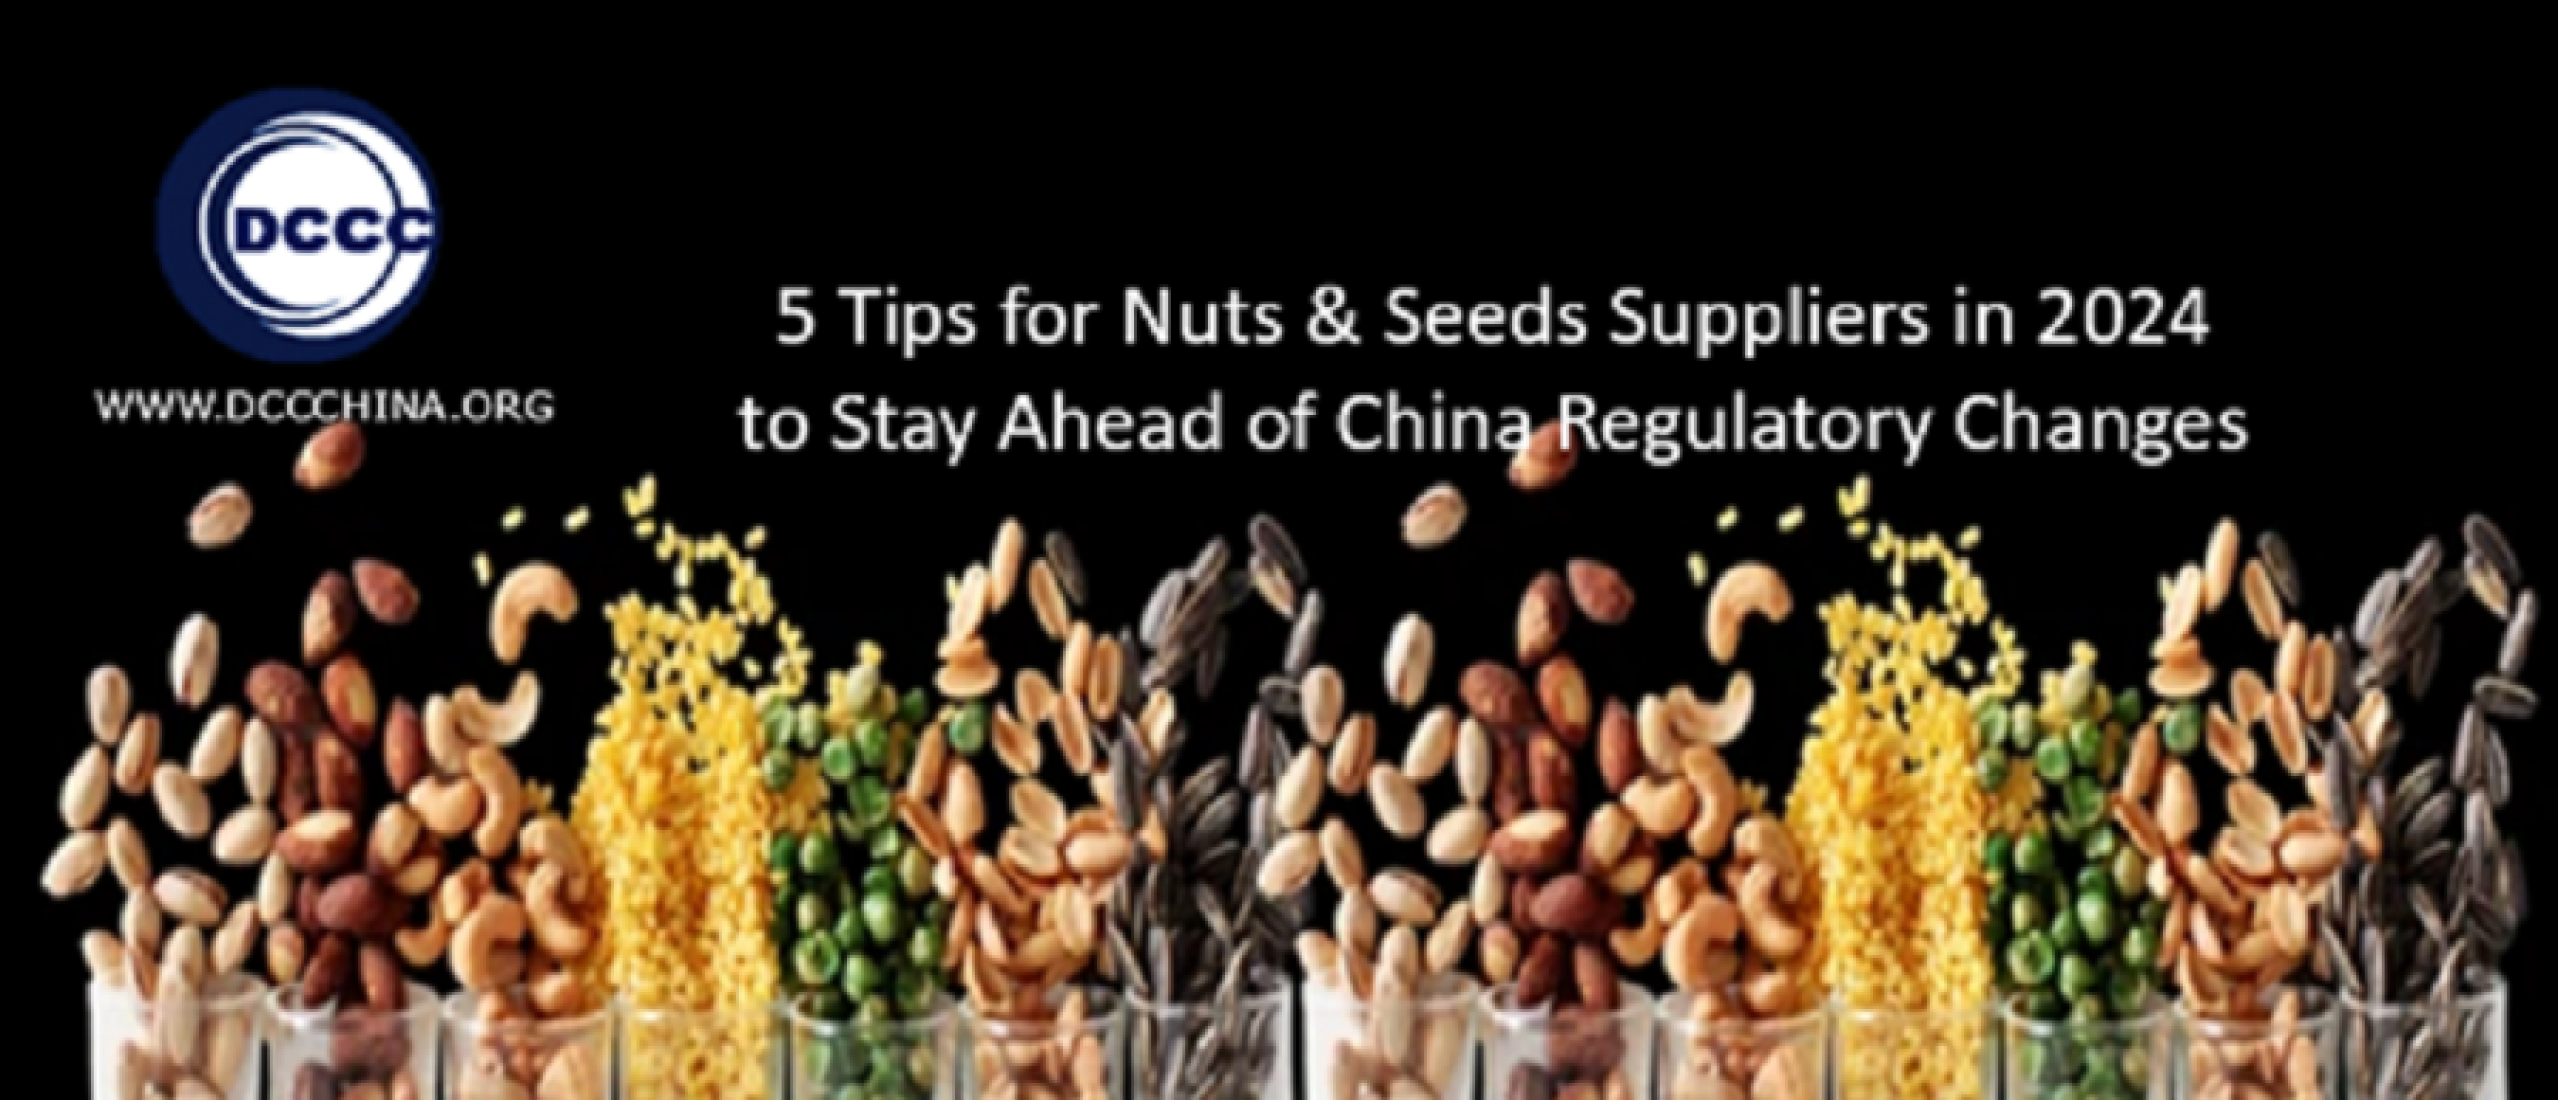 5 Tips for nuts & seeds suppliers in 2024